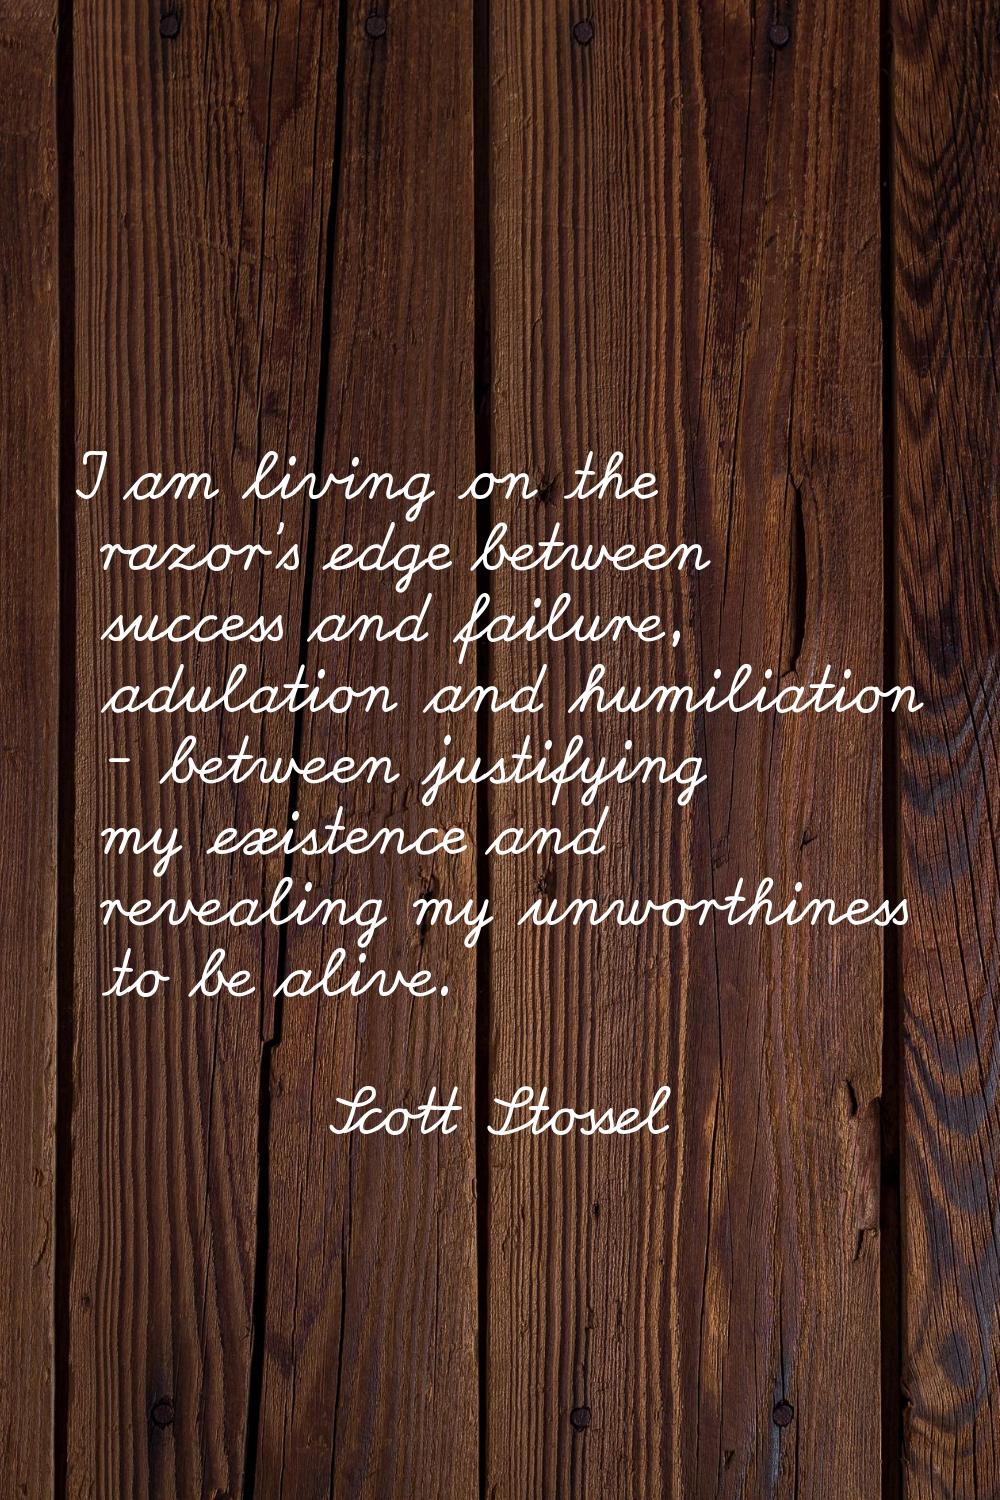 I am living on the razor's edge between success and failure, adulation and humiliation - between ju